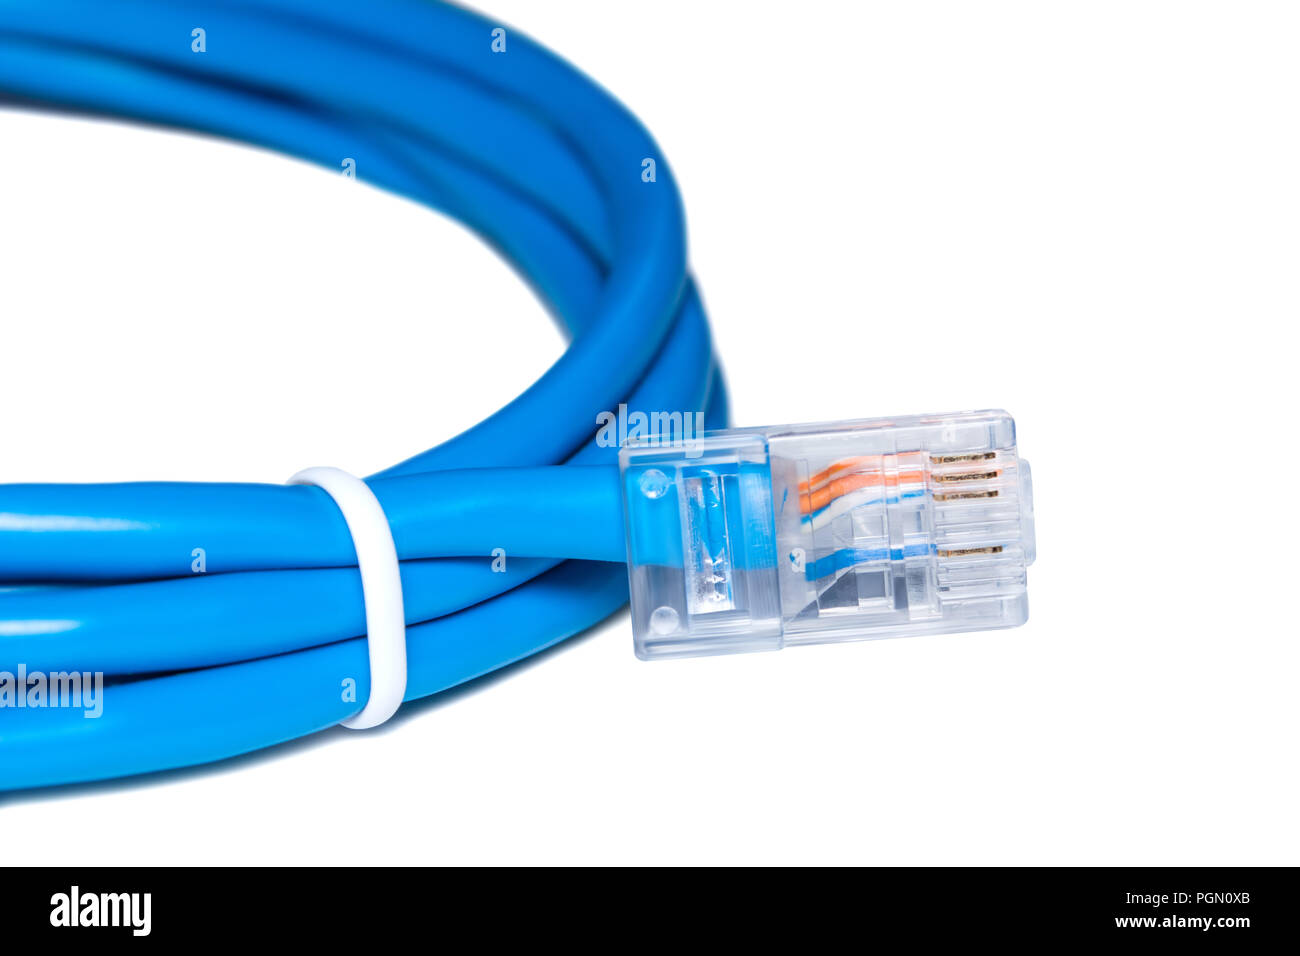 https://c8.alamy.com/comp/PGN0XB/lan-network-cable-with-adsl-connector-ethernet-line-isolated-on-white-background-PGN0XB.jpg